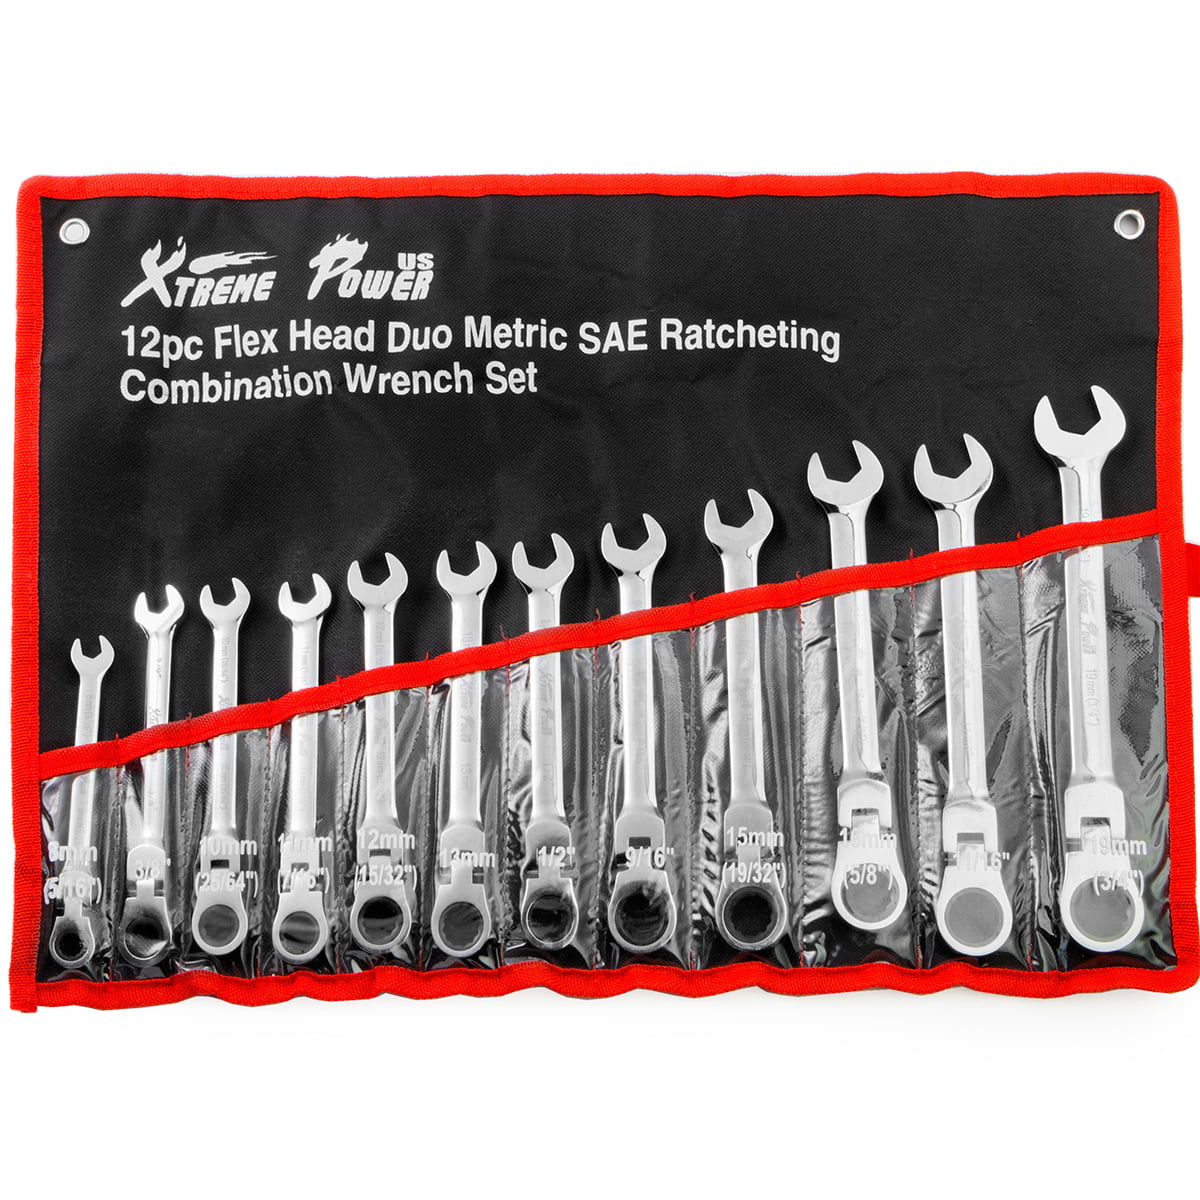 12pc 8-19mm Metric Flexible Head Ratcheting Wrench Combination Spanner Tool Set 